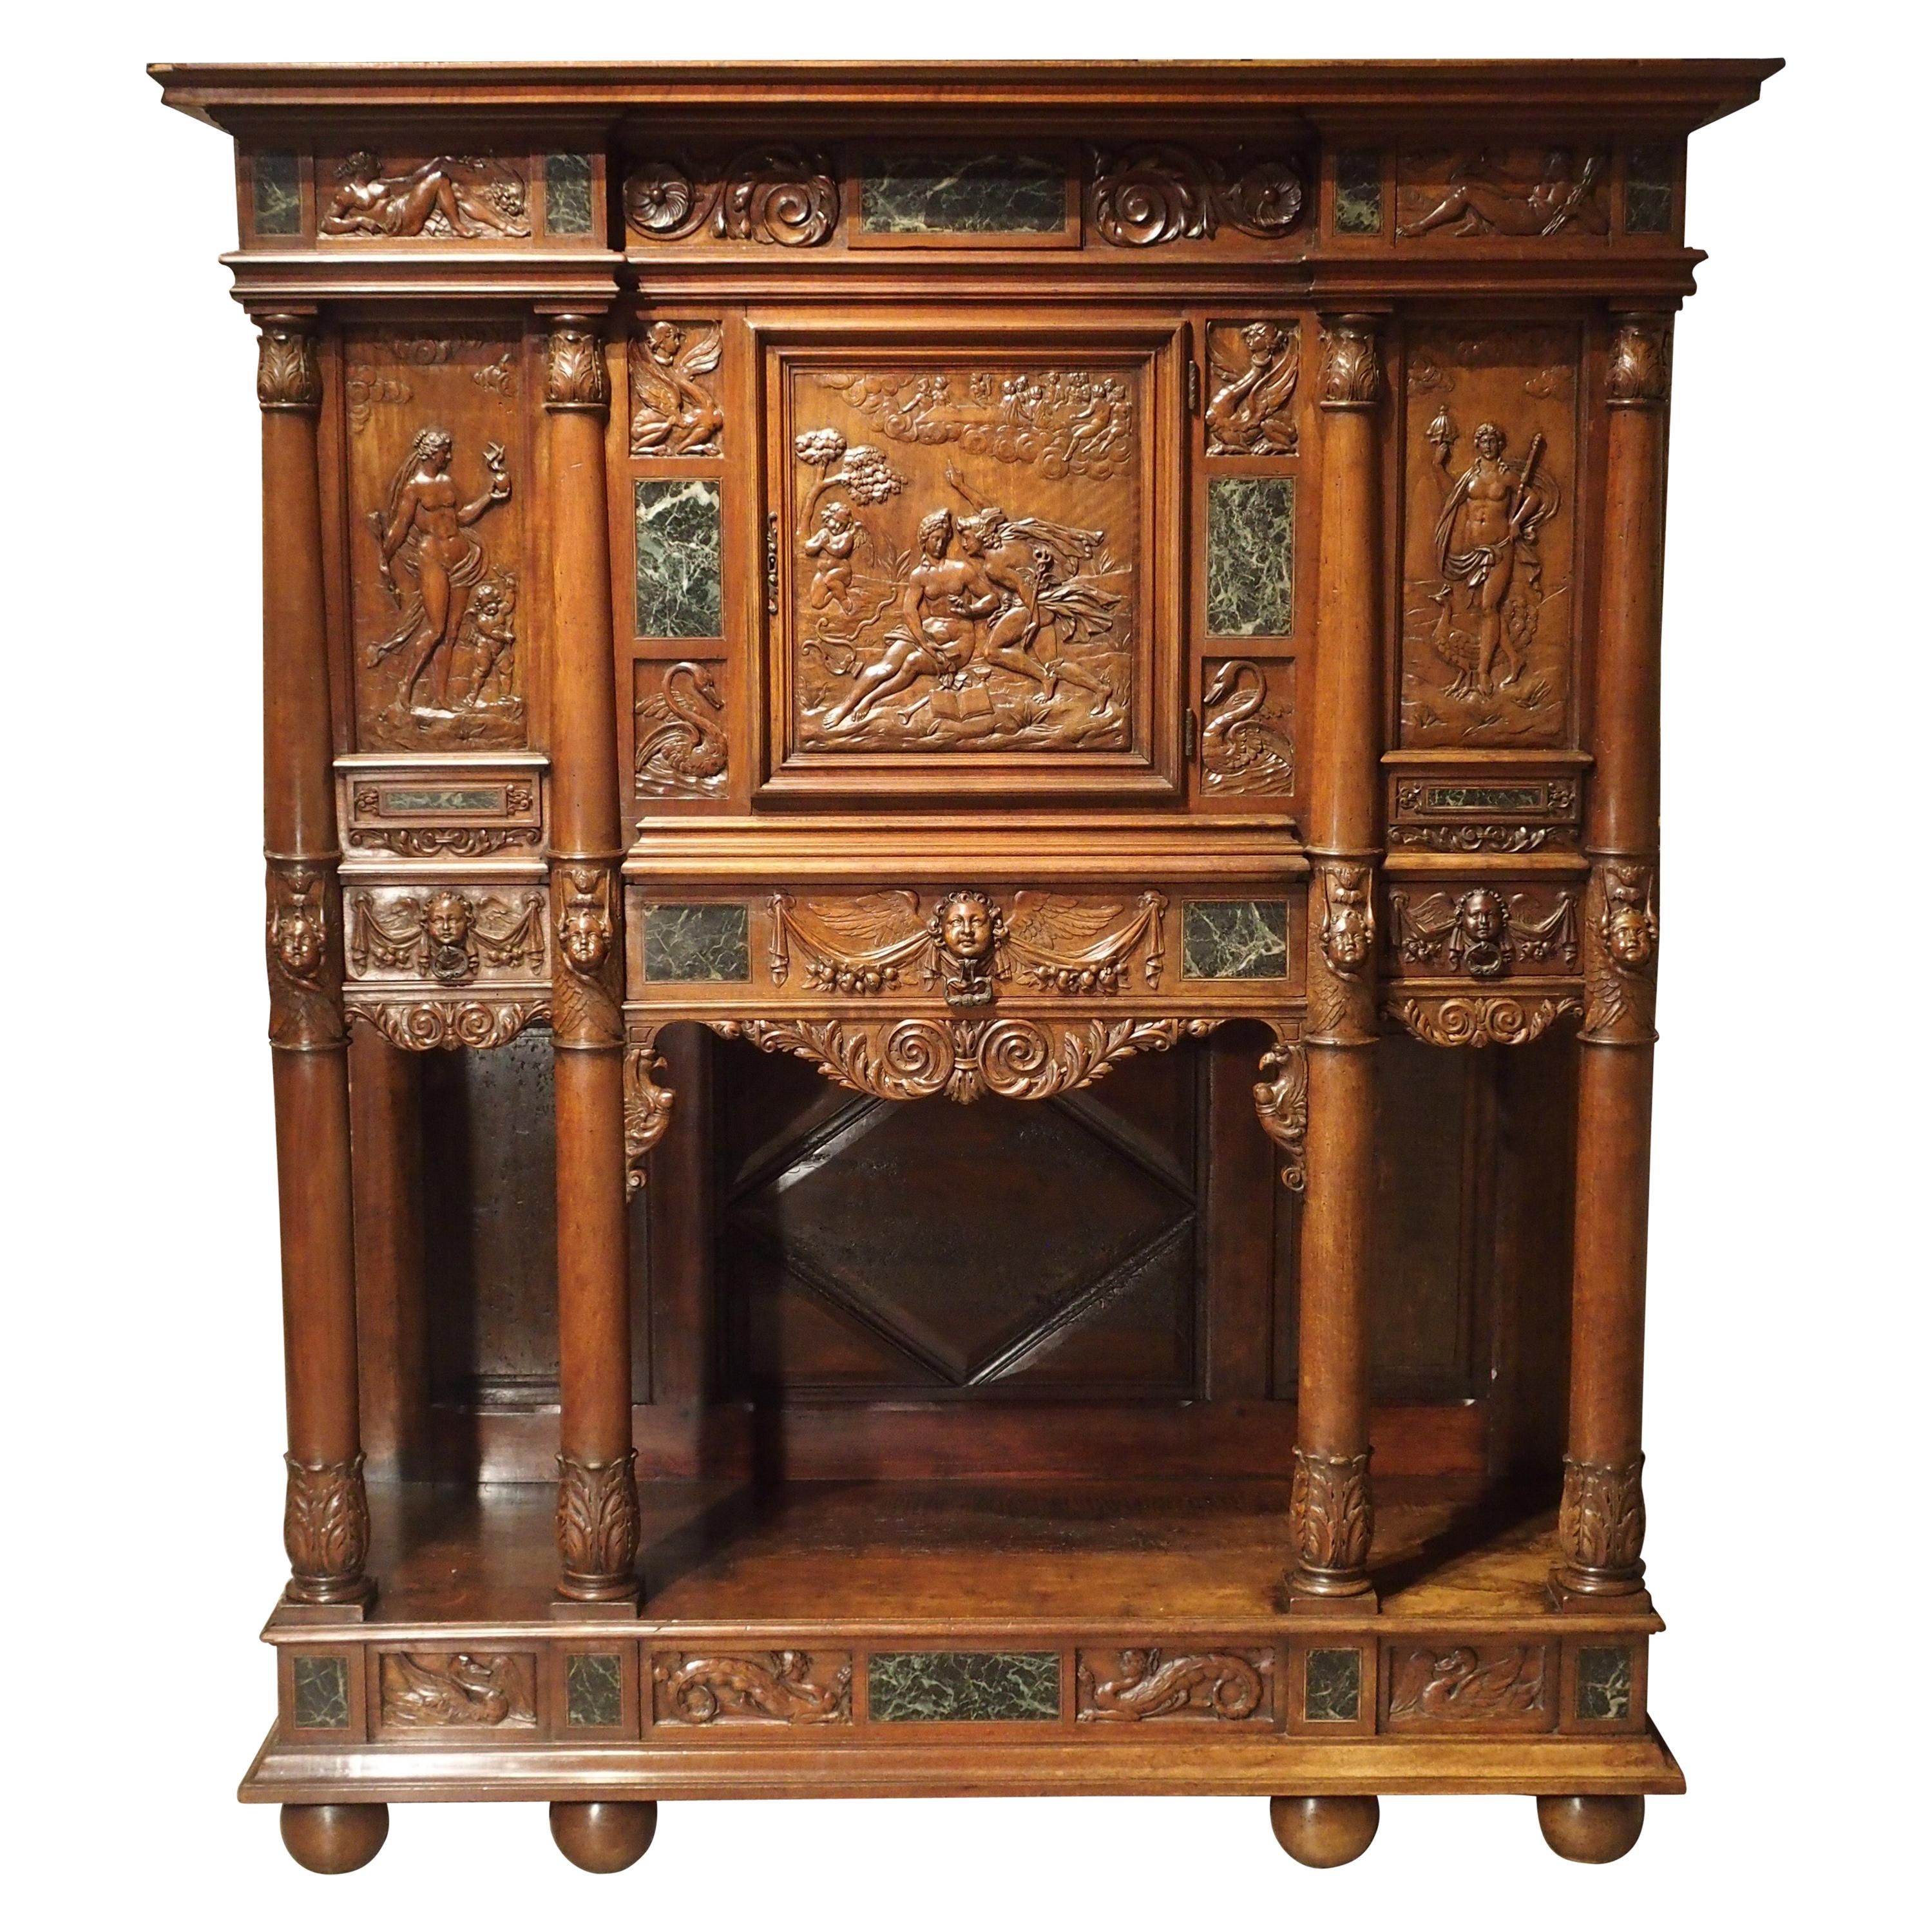 Period Napoleon III Walnut and Marble Buffet Cabinet from France, circa 1860